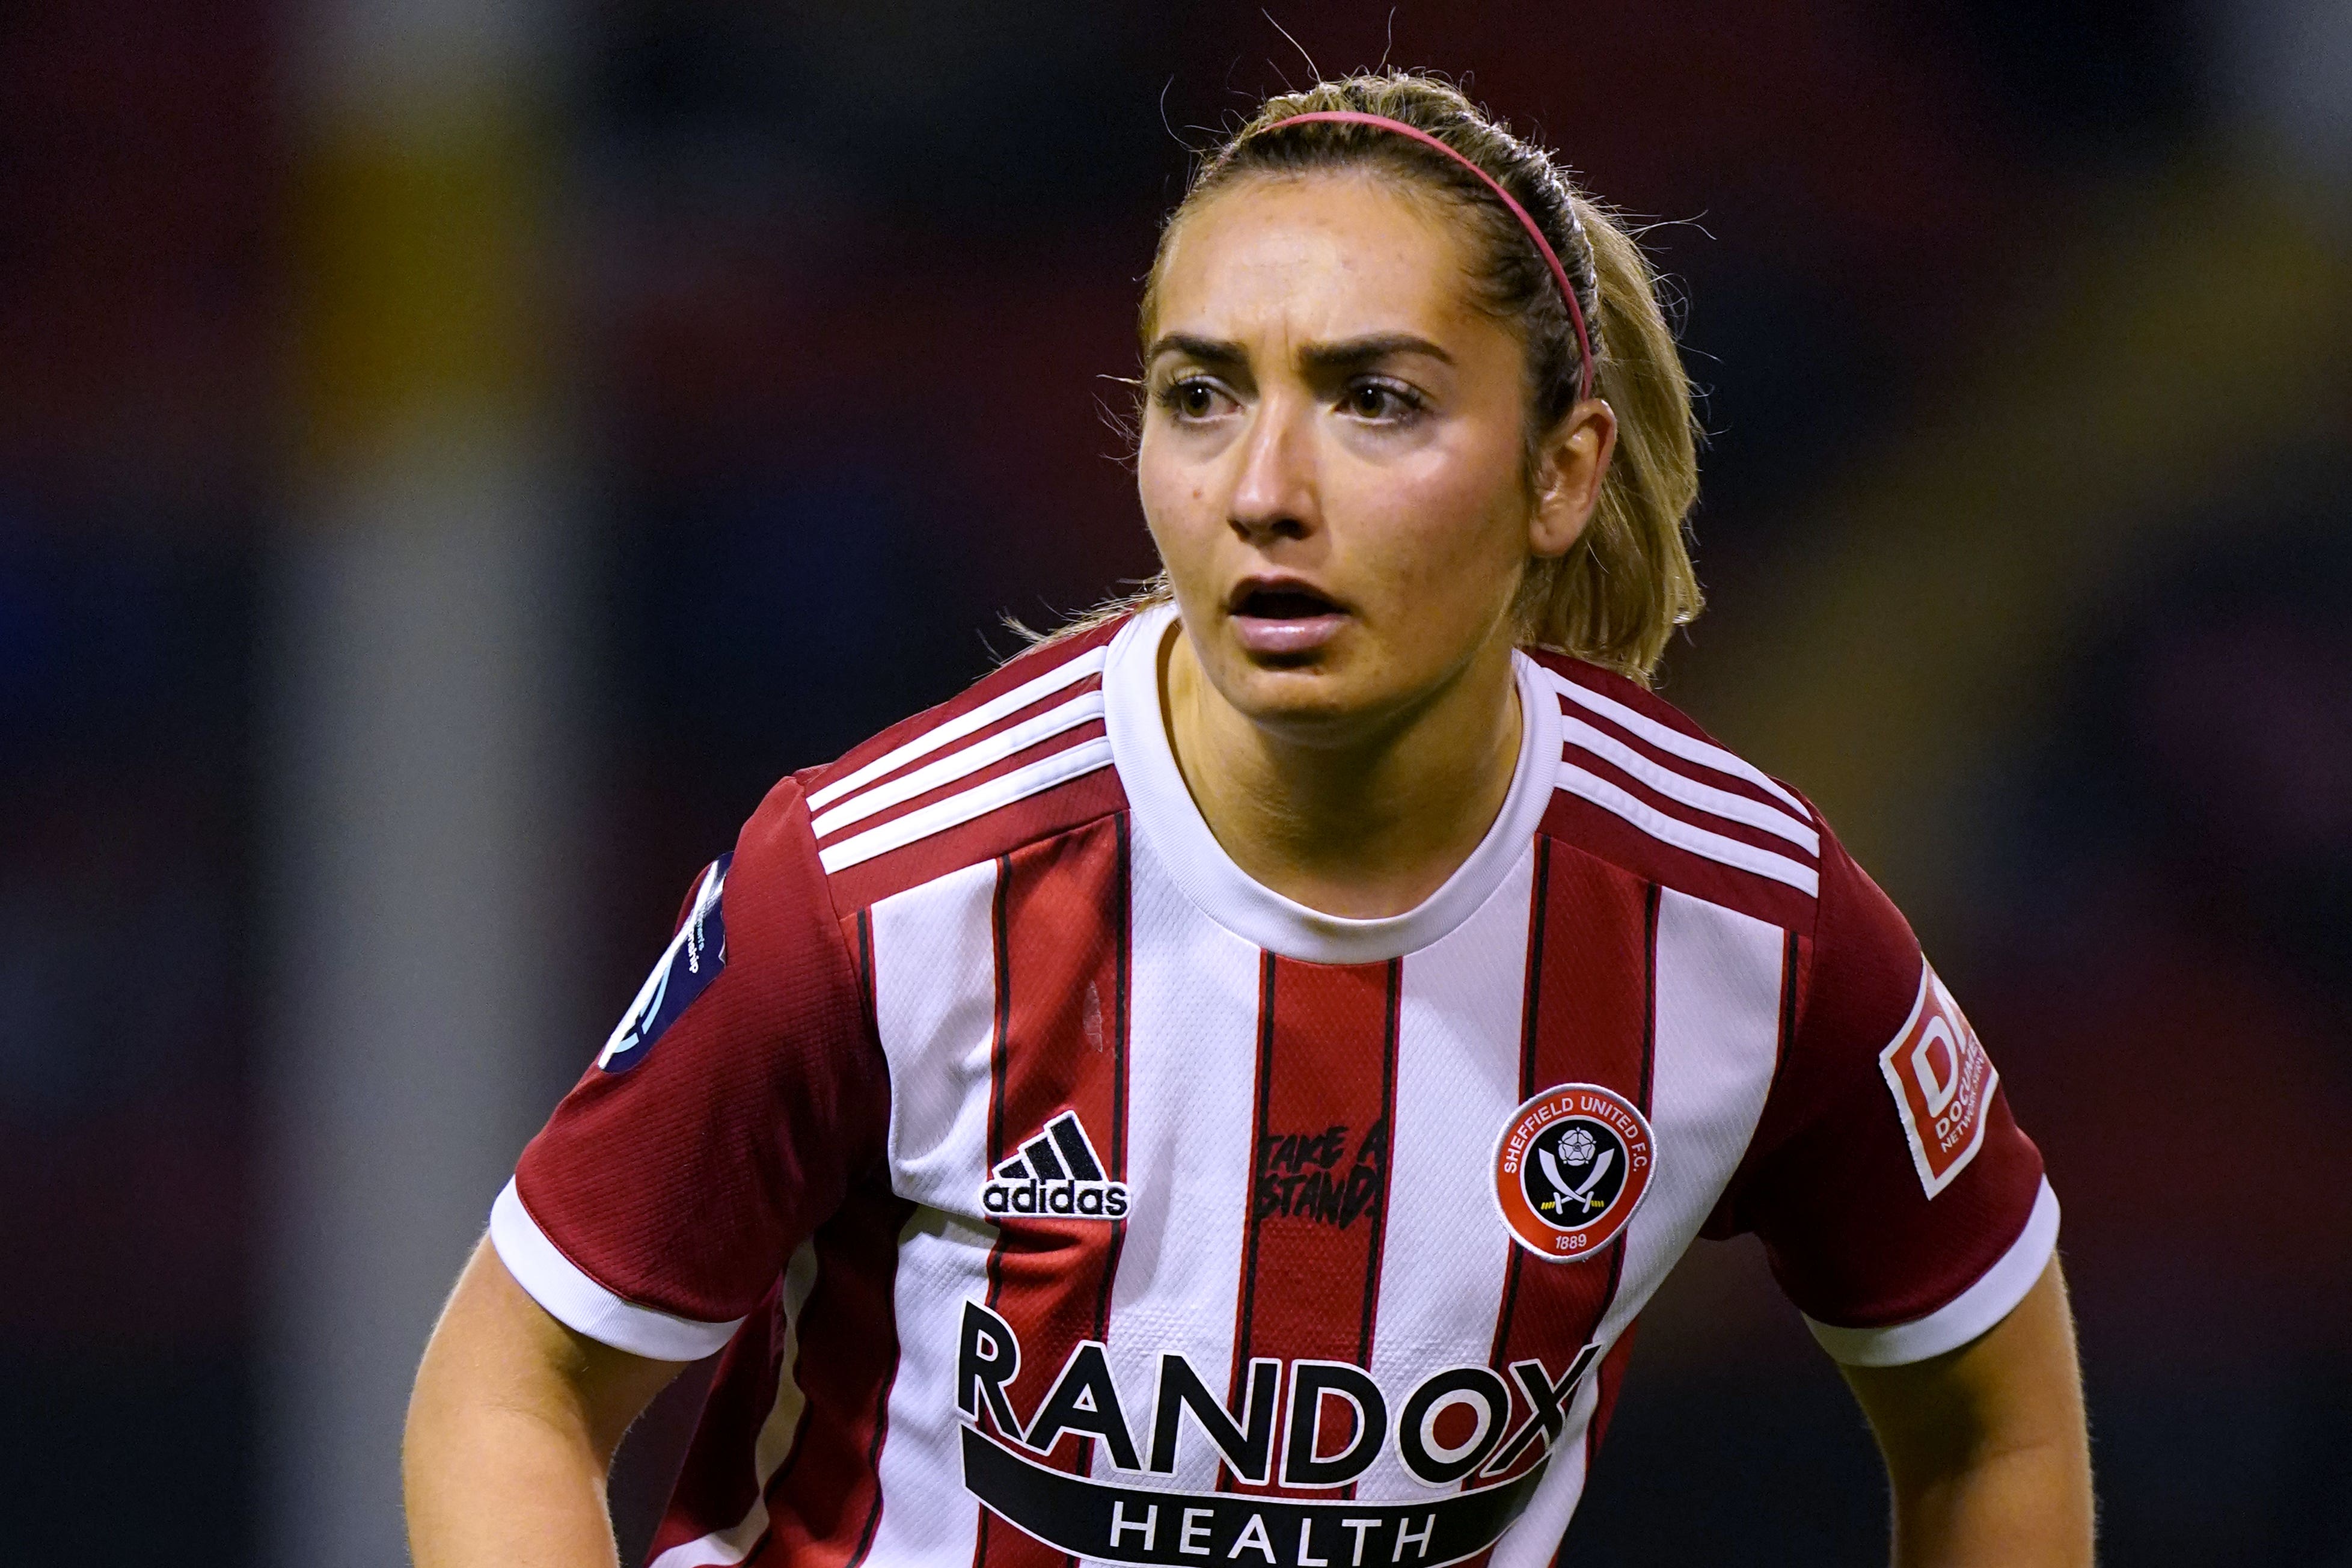 Maddy Cusack made over 100 appearances for Sheffield United before her death